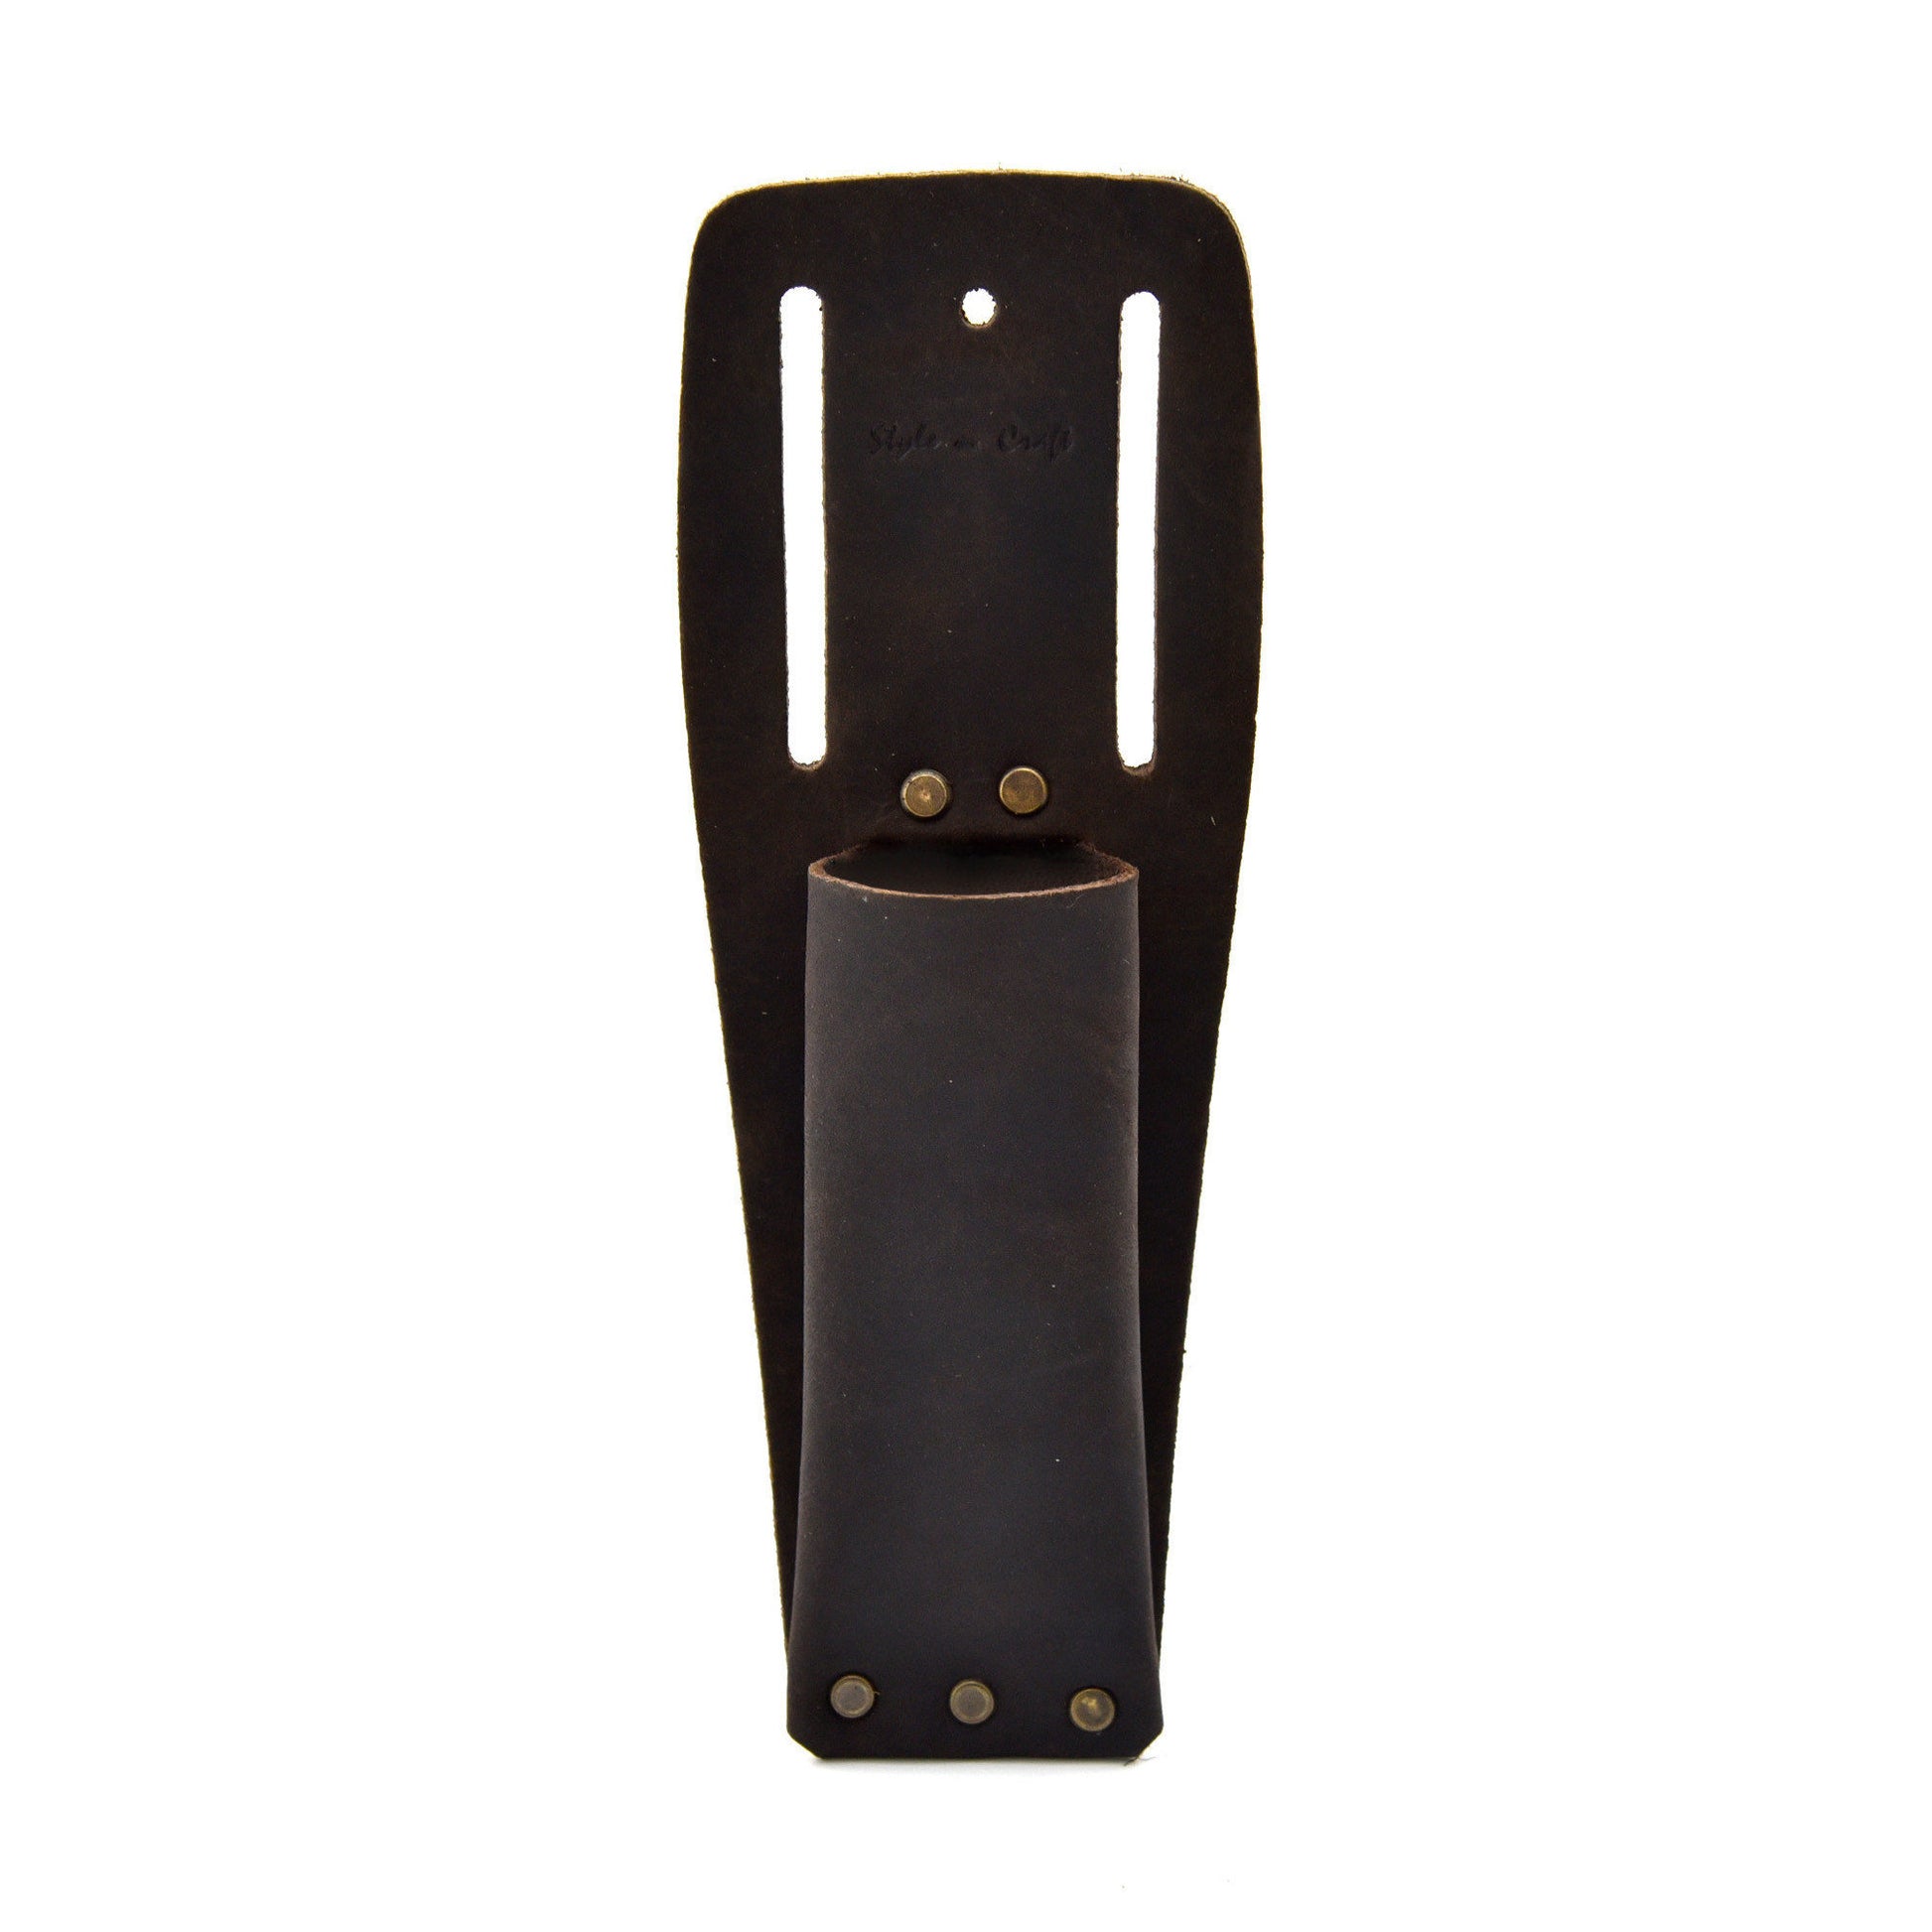 Style n Craft - 70010 Utility Knife Sheath in Heavy Duty Full Grain Oiled Leather in dark brown color